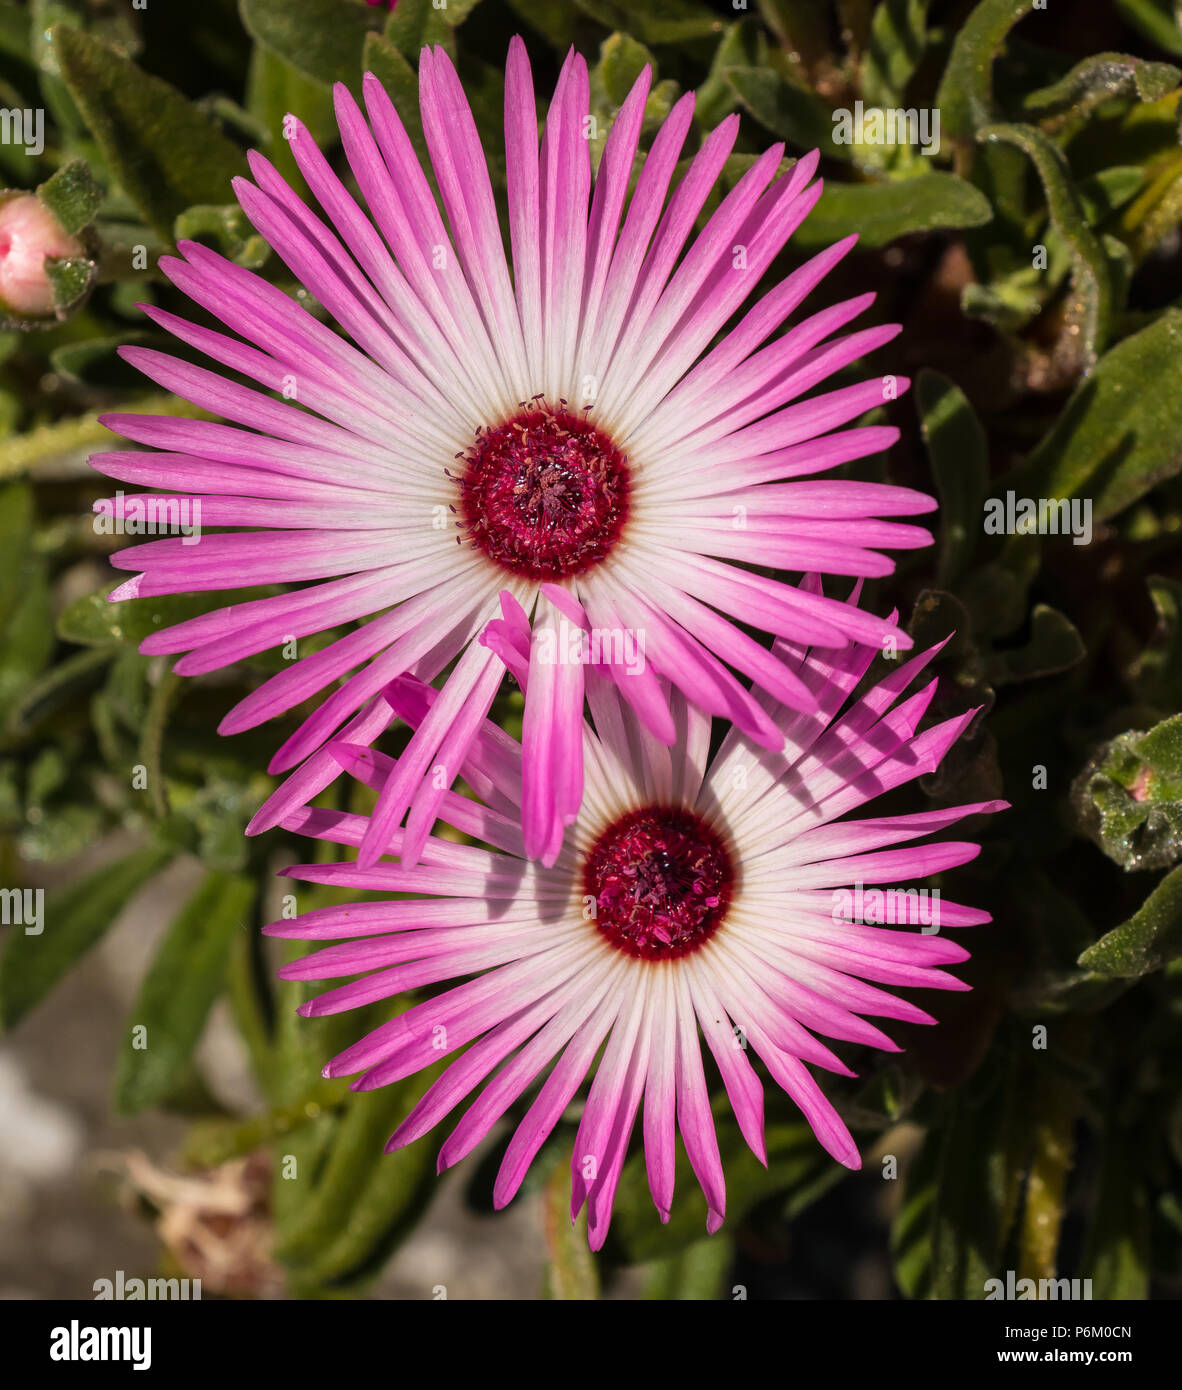 Two pale pink and white Mesembryanthemum (Livingstone Daisy) flowers closeup in sunshine Stock Photo